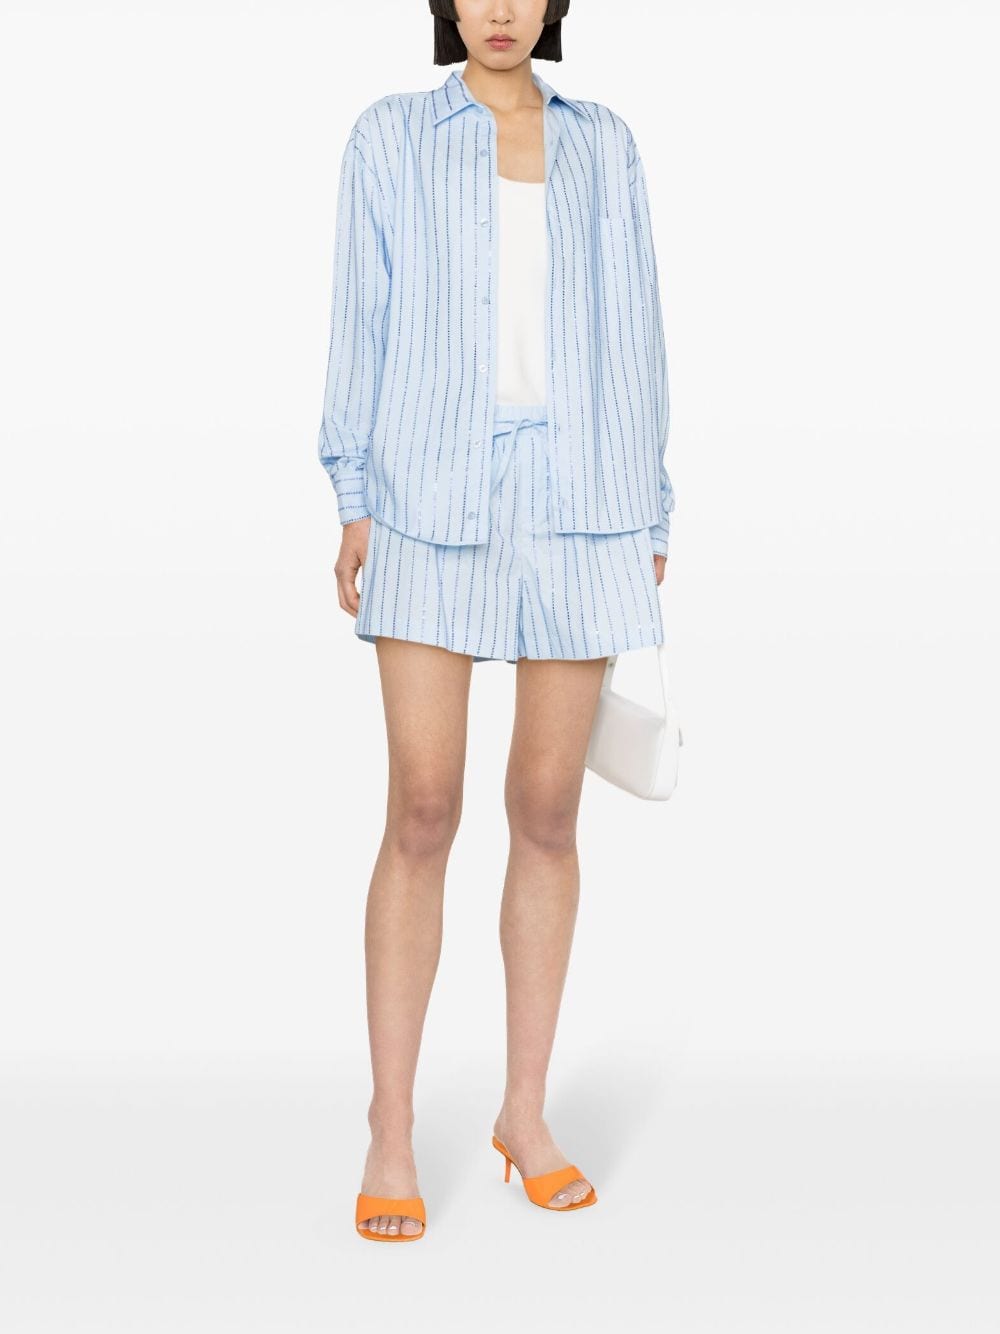 GIUSEPPE DI MORABITO Crystal Embellished Striped Shirt for Women in Light Blue - SS24